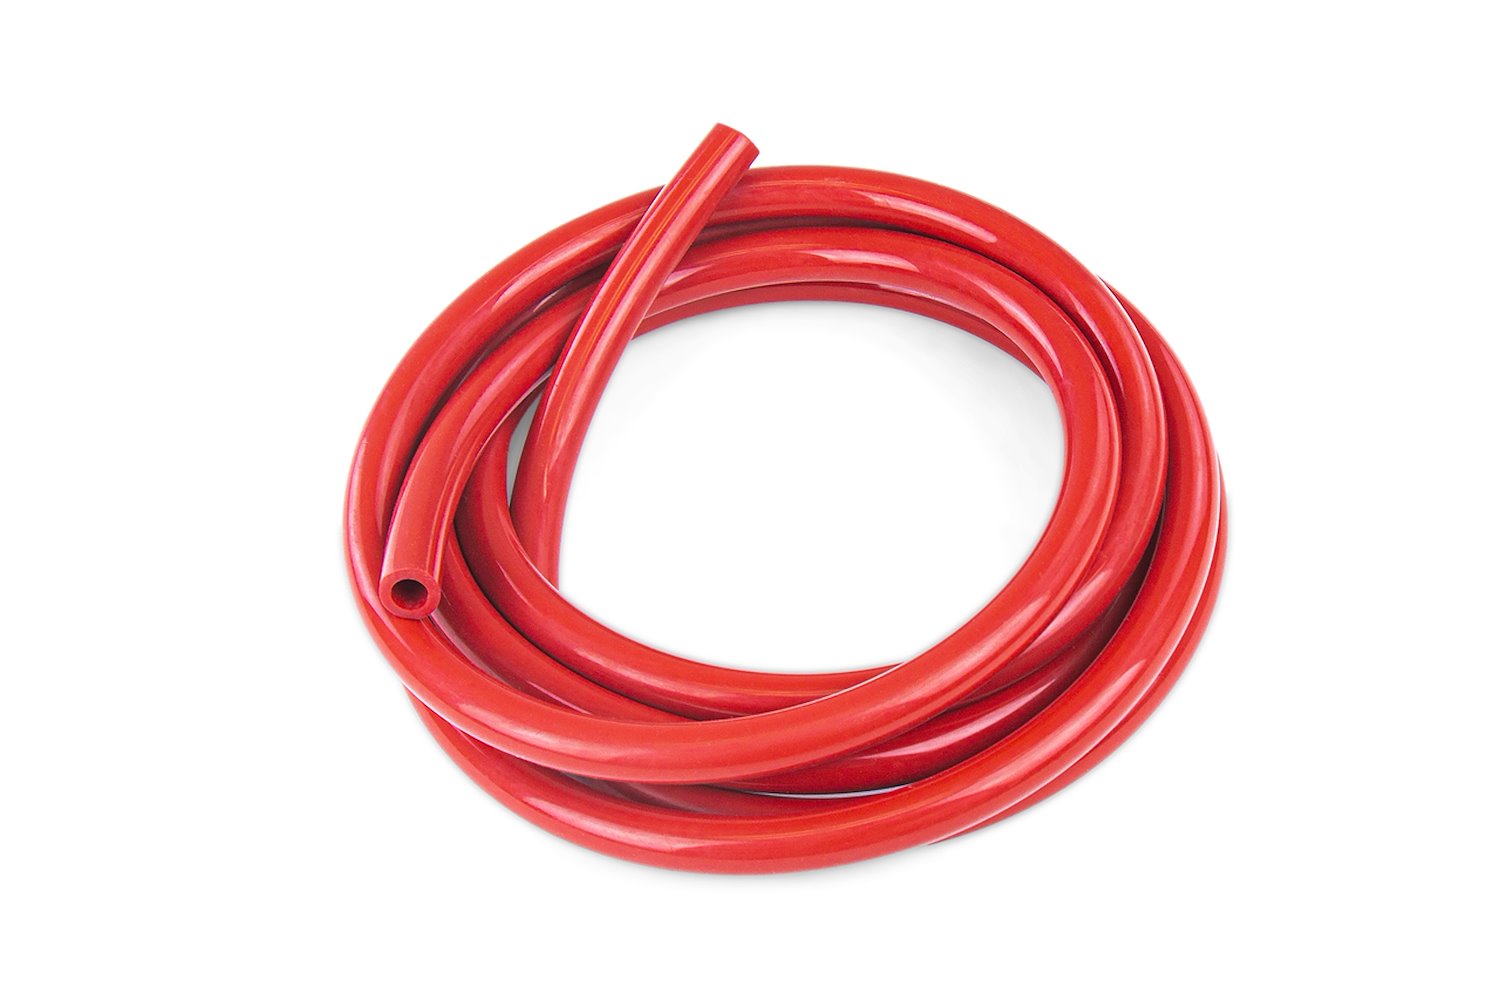 HTSVH95-REDx5 High-Temperature Silicone Vacuum Hose Tubing, 3/8 in. ID, 5 ft. Roll, Red